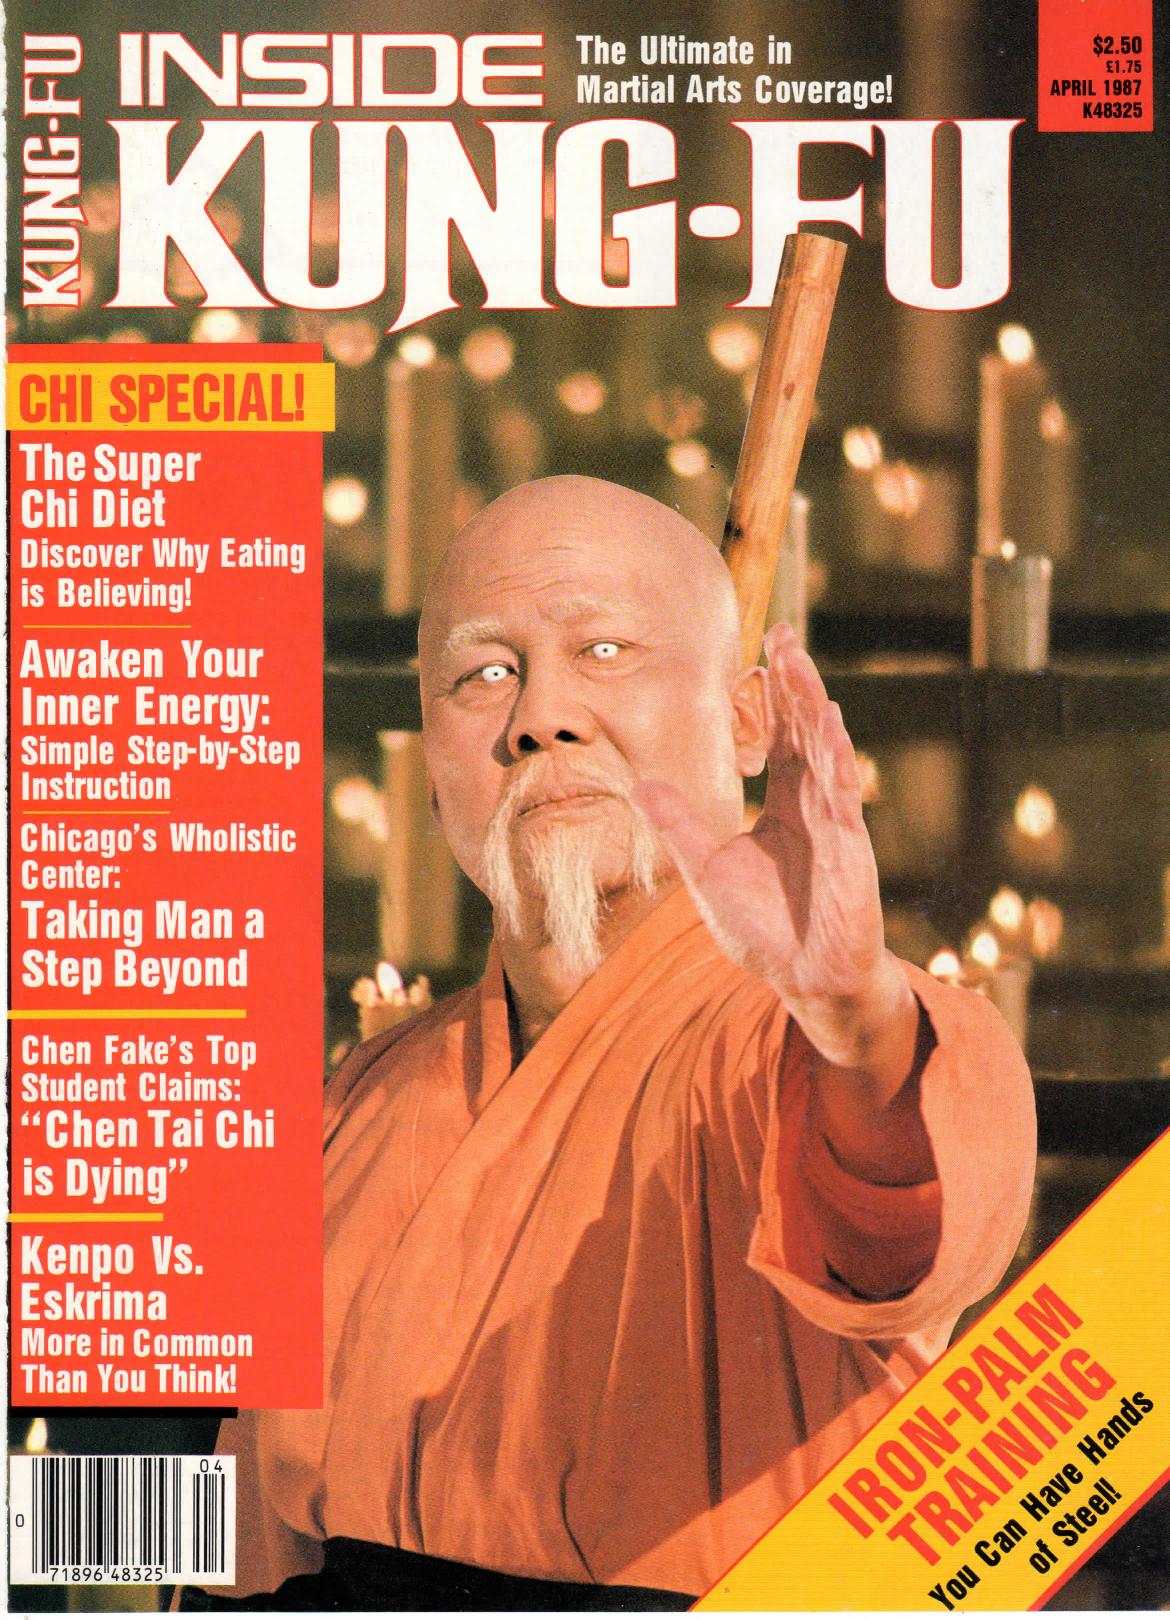 Inside Kung Fu Magazine April 1987 87/04   *COLLECTIBLE*